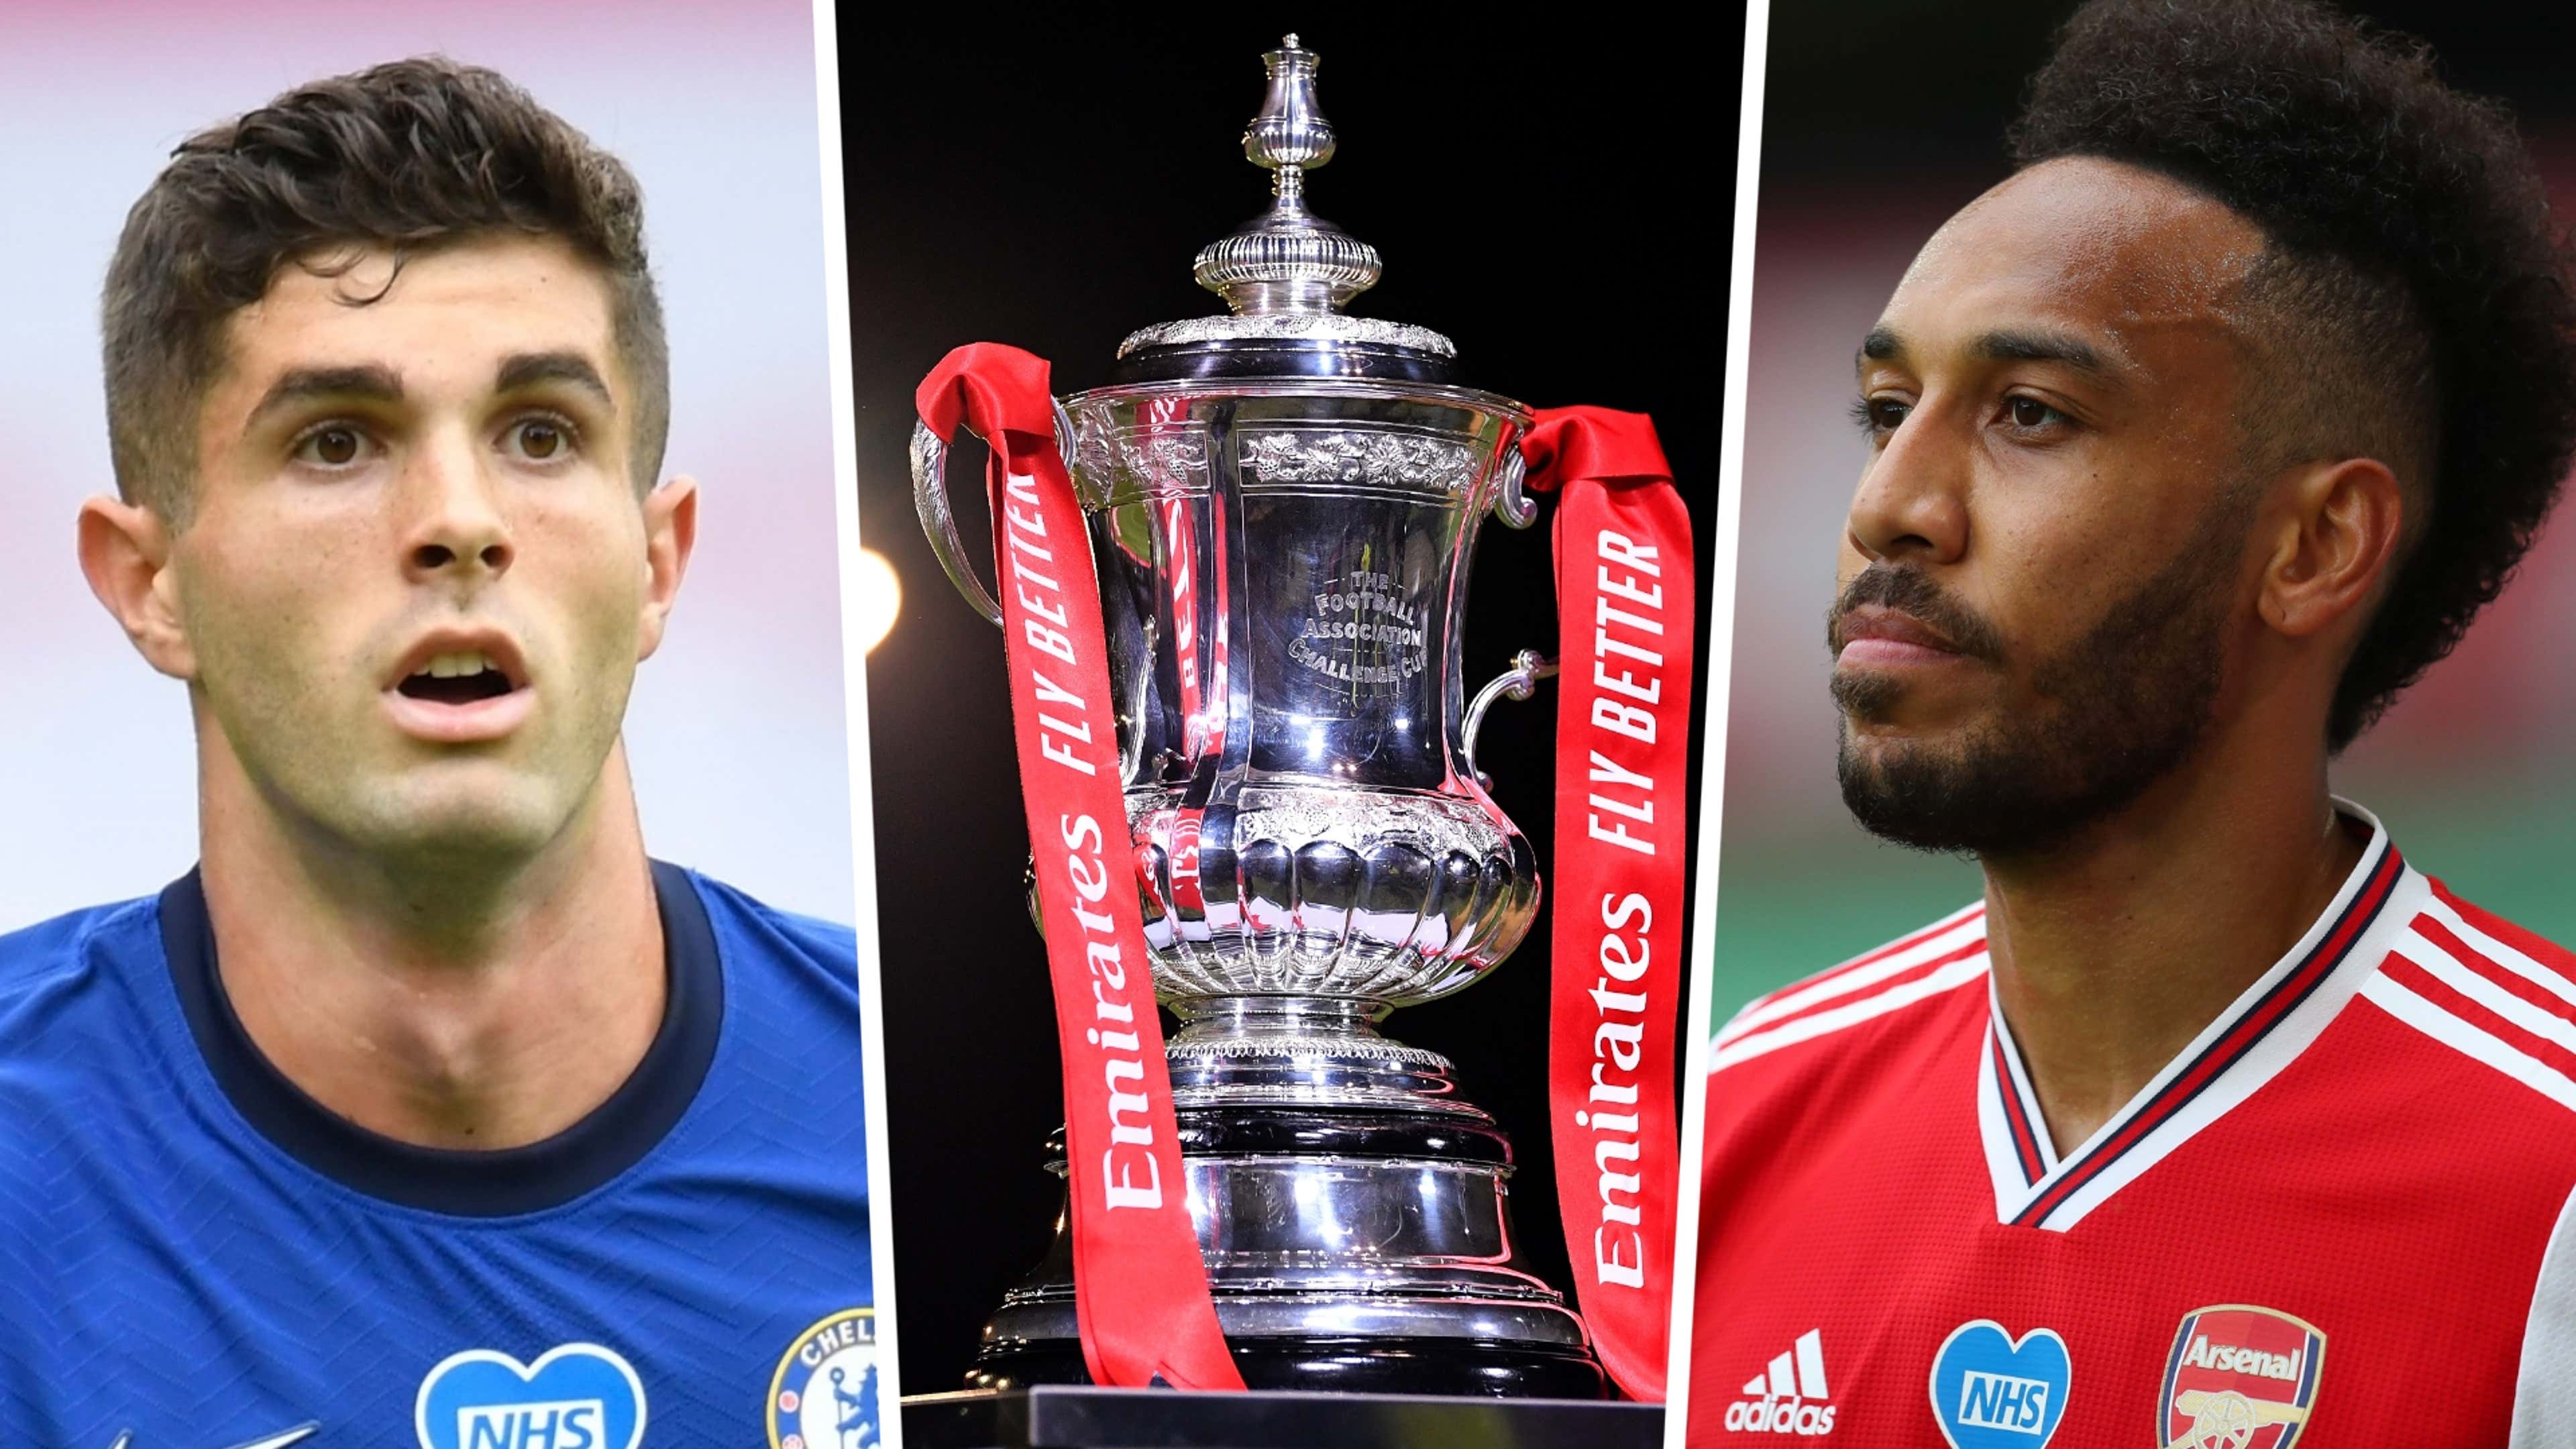 Chelsea to face giant-killing Middlesbrough in FA Cup quarter-finals